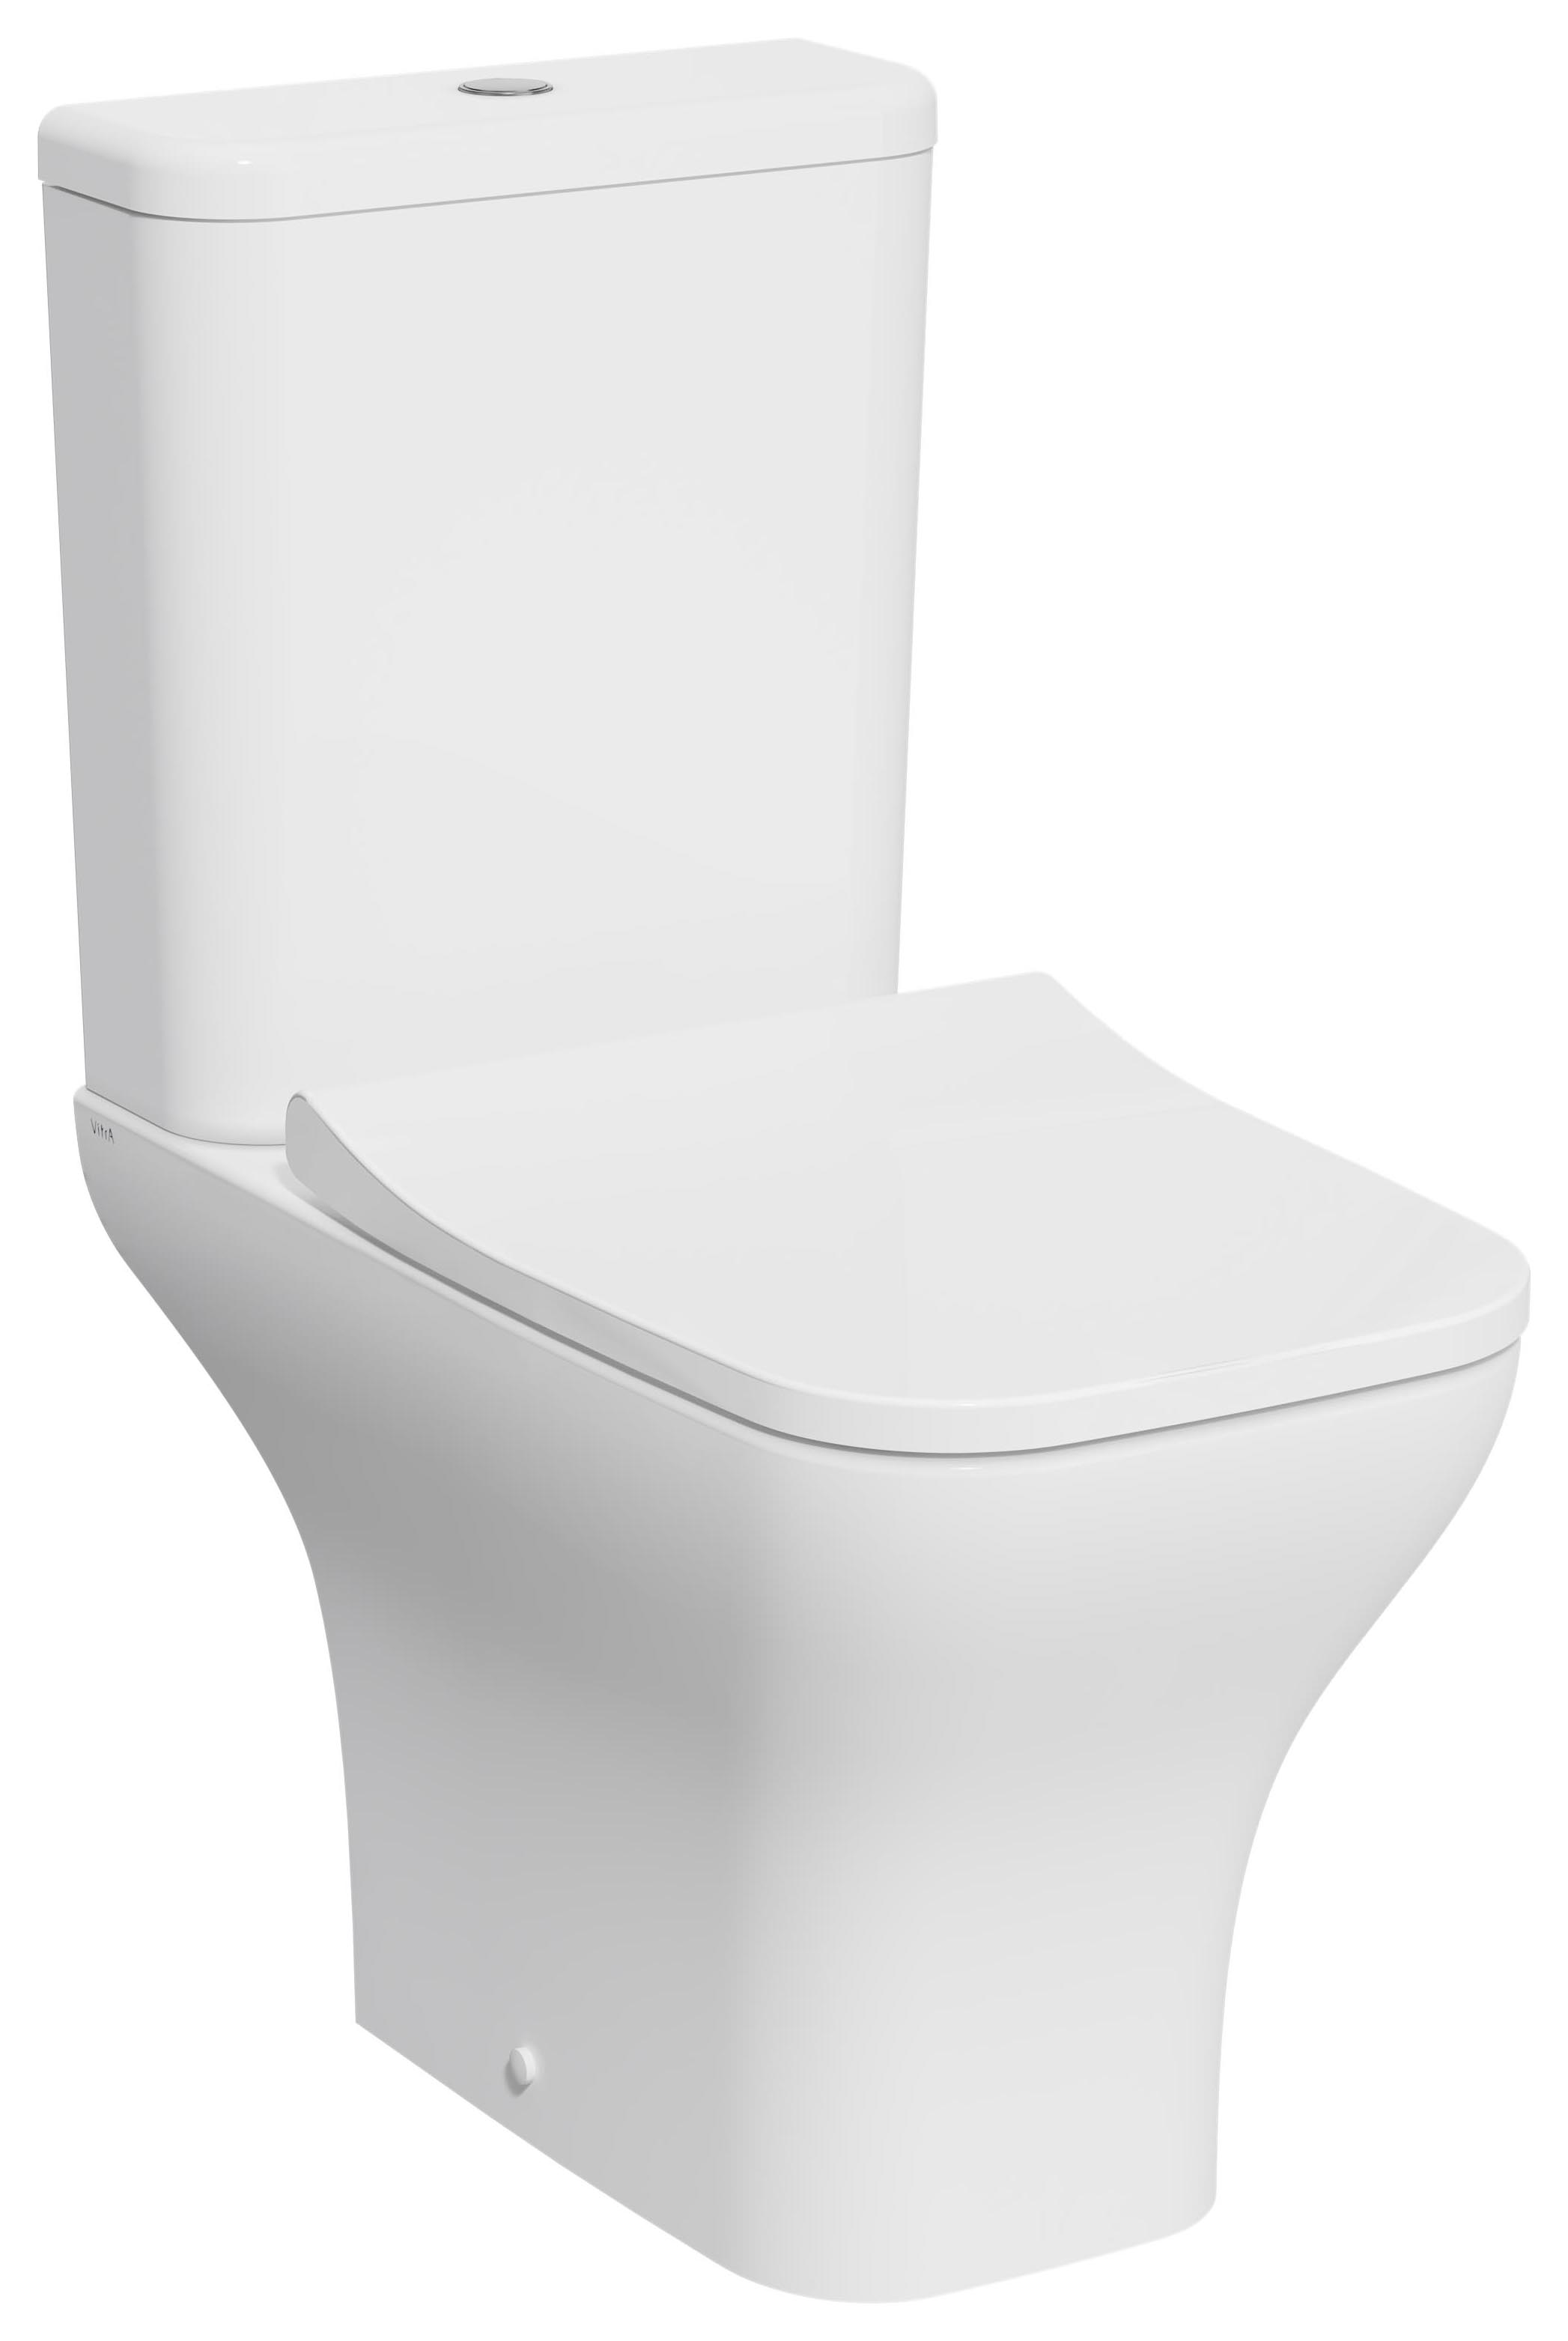 Image of Kerala Square Smooth Flush Open Back Close Coupled Toilet Pan, Cistern & Soft Close Seat